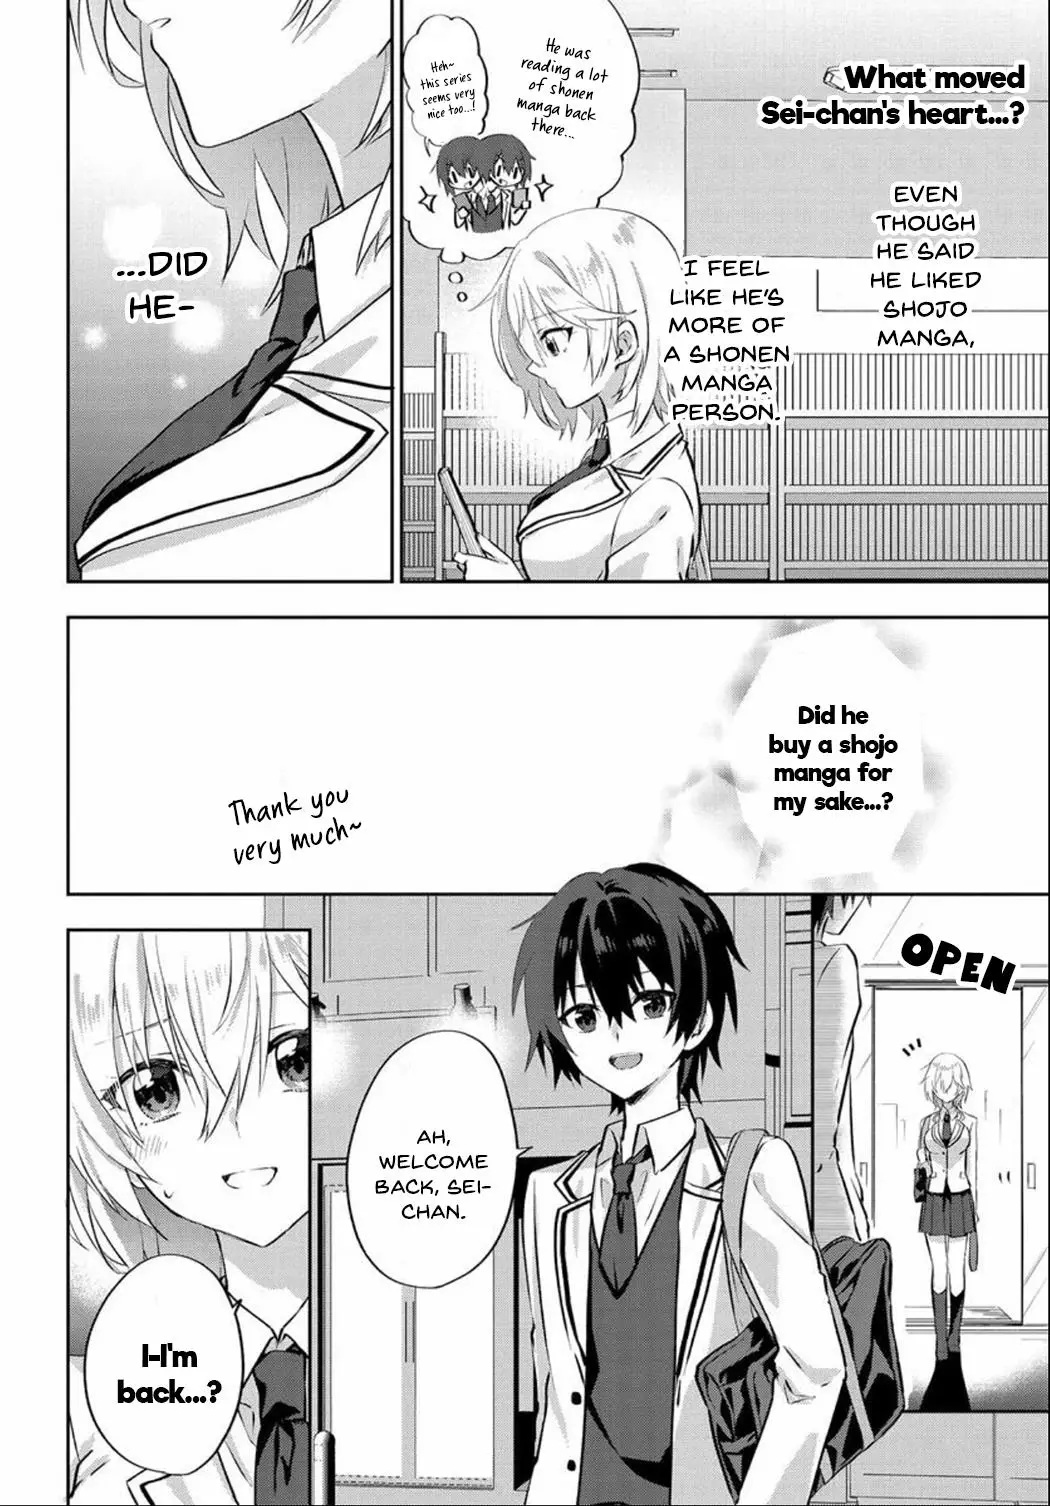 Since I’Ve Entered The World Of Romantic Comedy Manga, I’Ll Do My Best To Make The Losing Heroine Happy - 5.2 page 1-7031c11c